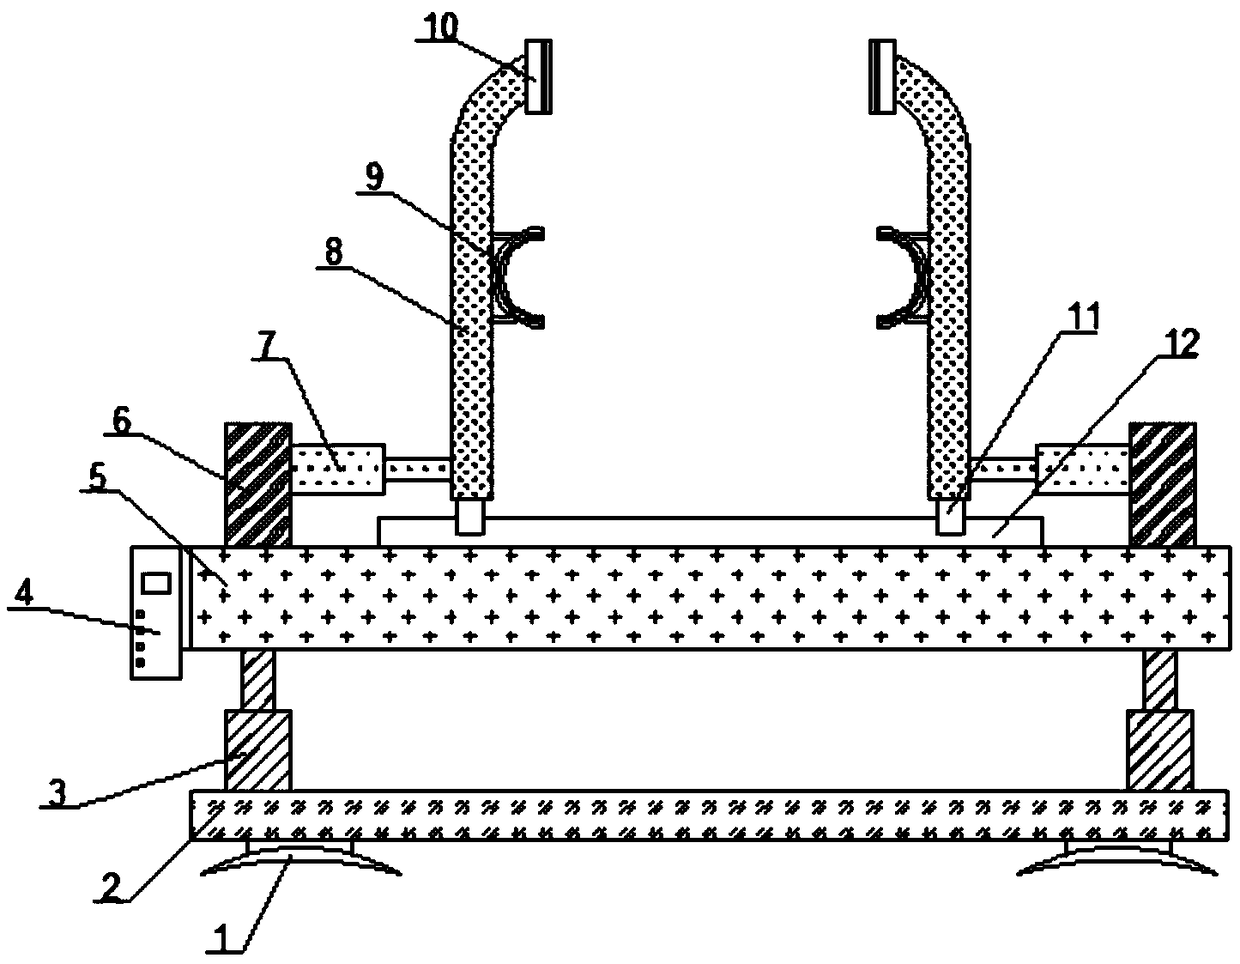 Welding fixture for gear selecting and shifting flexible shaft support assembly